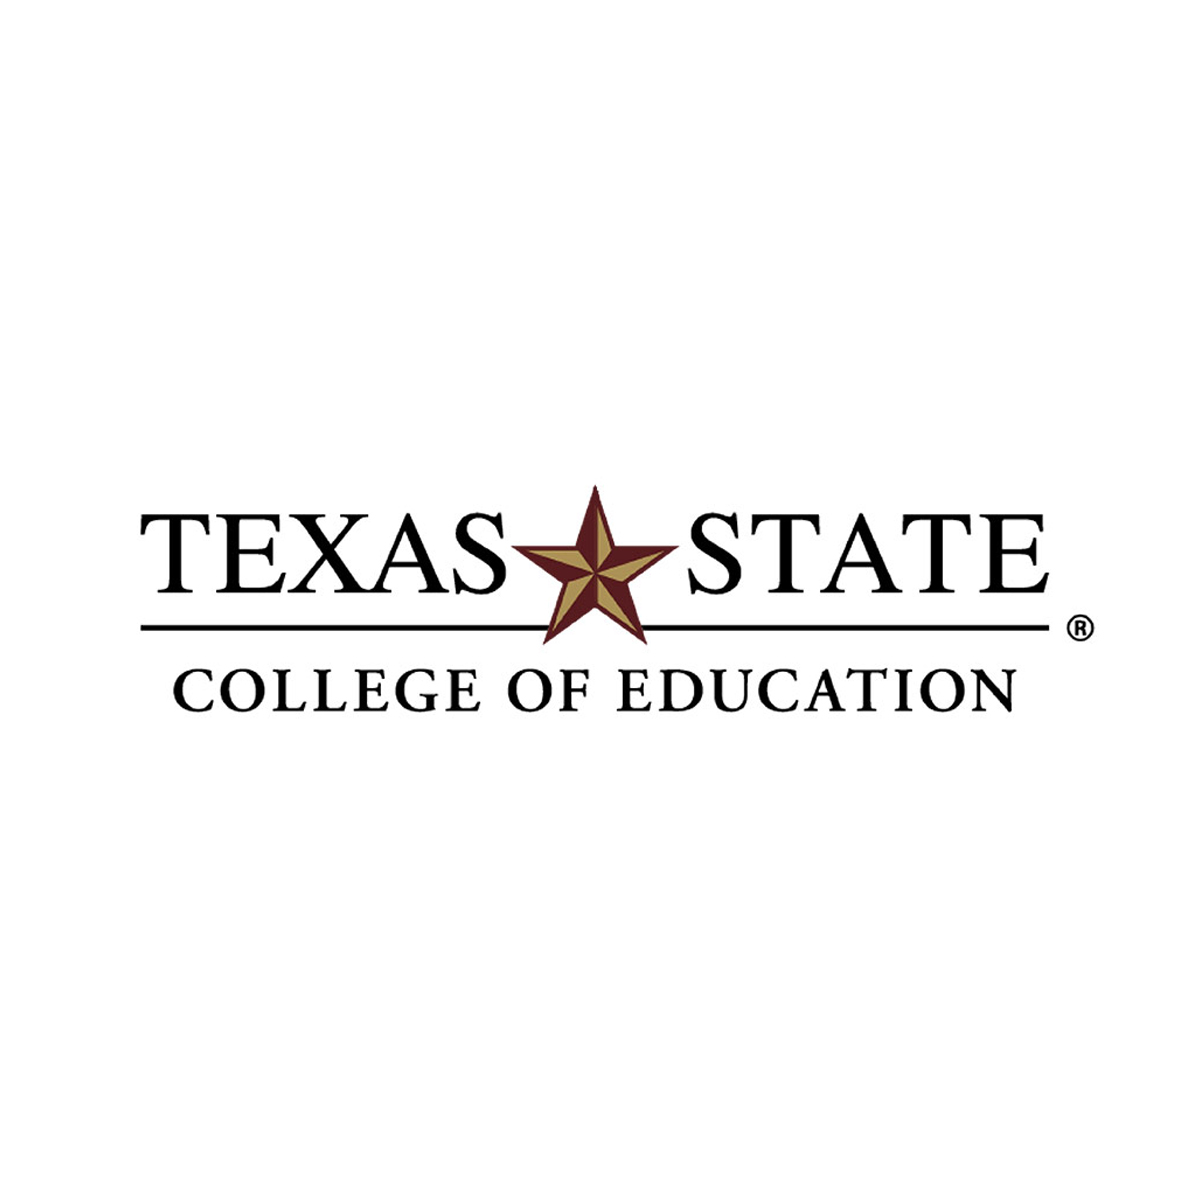 Texas State College of Education featured logo